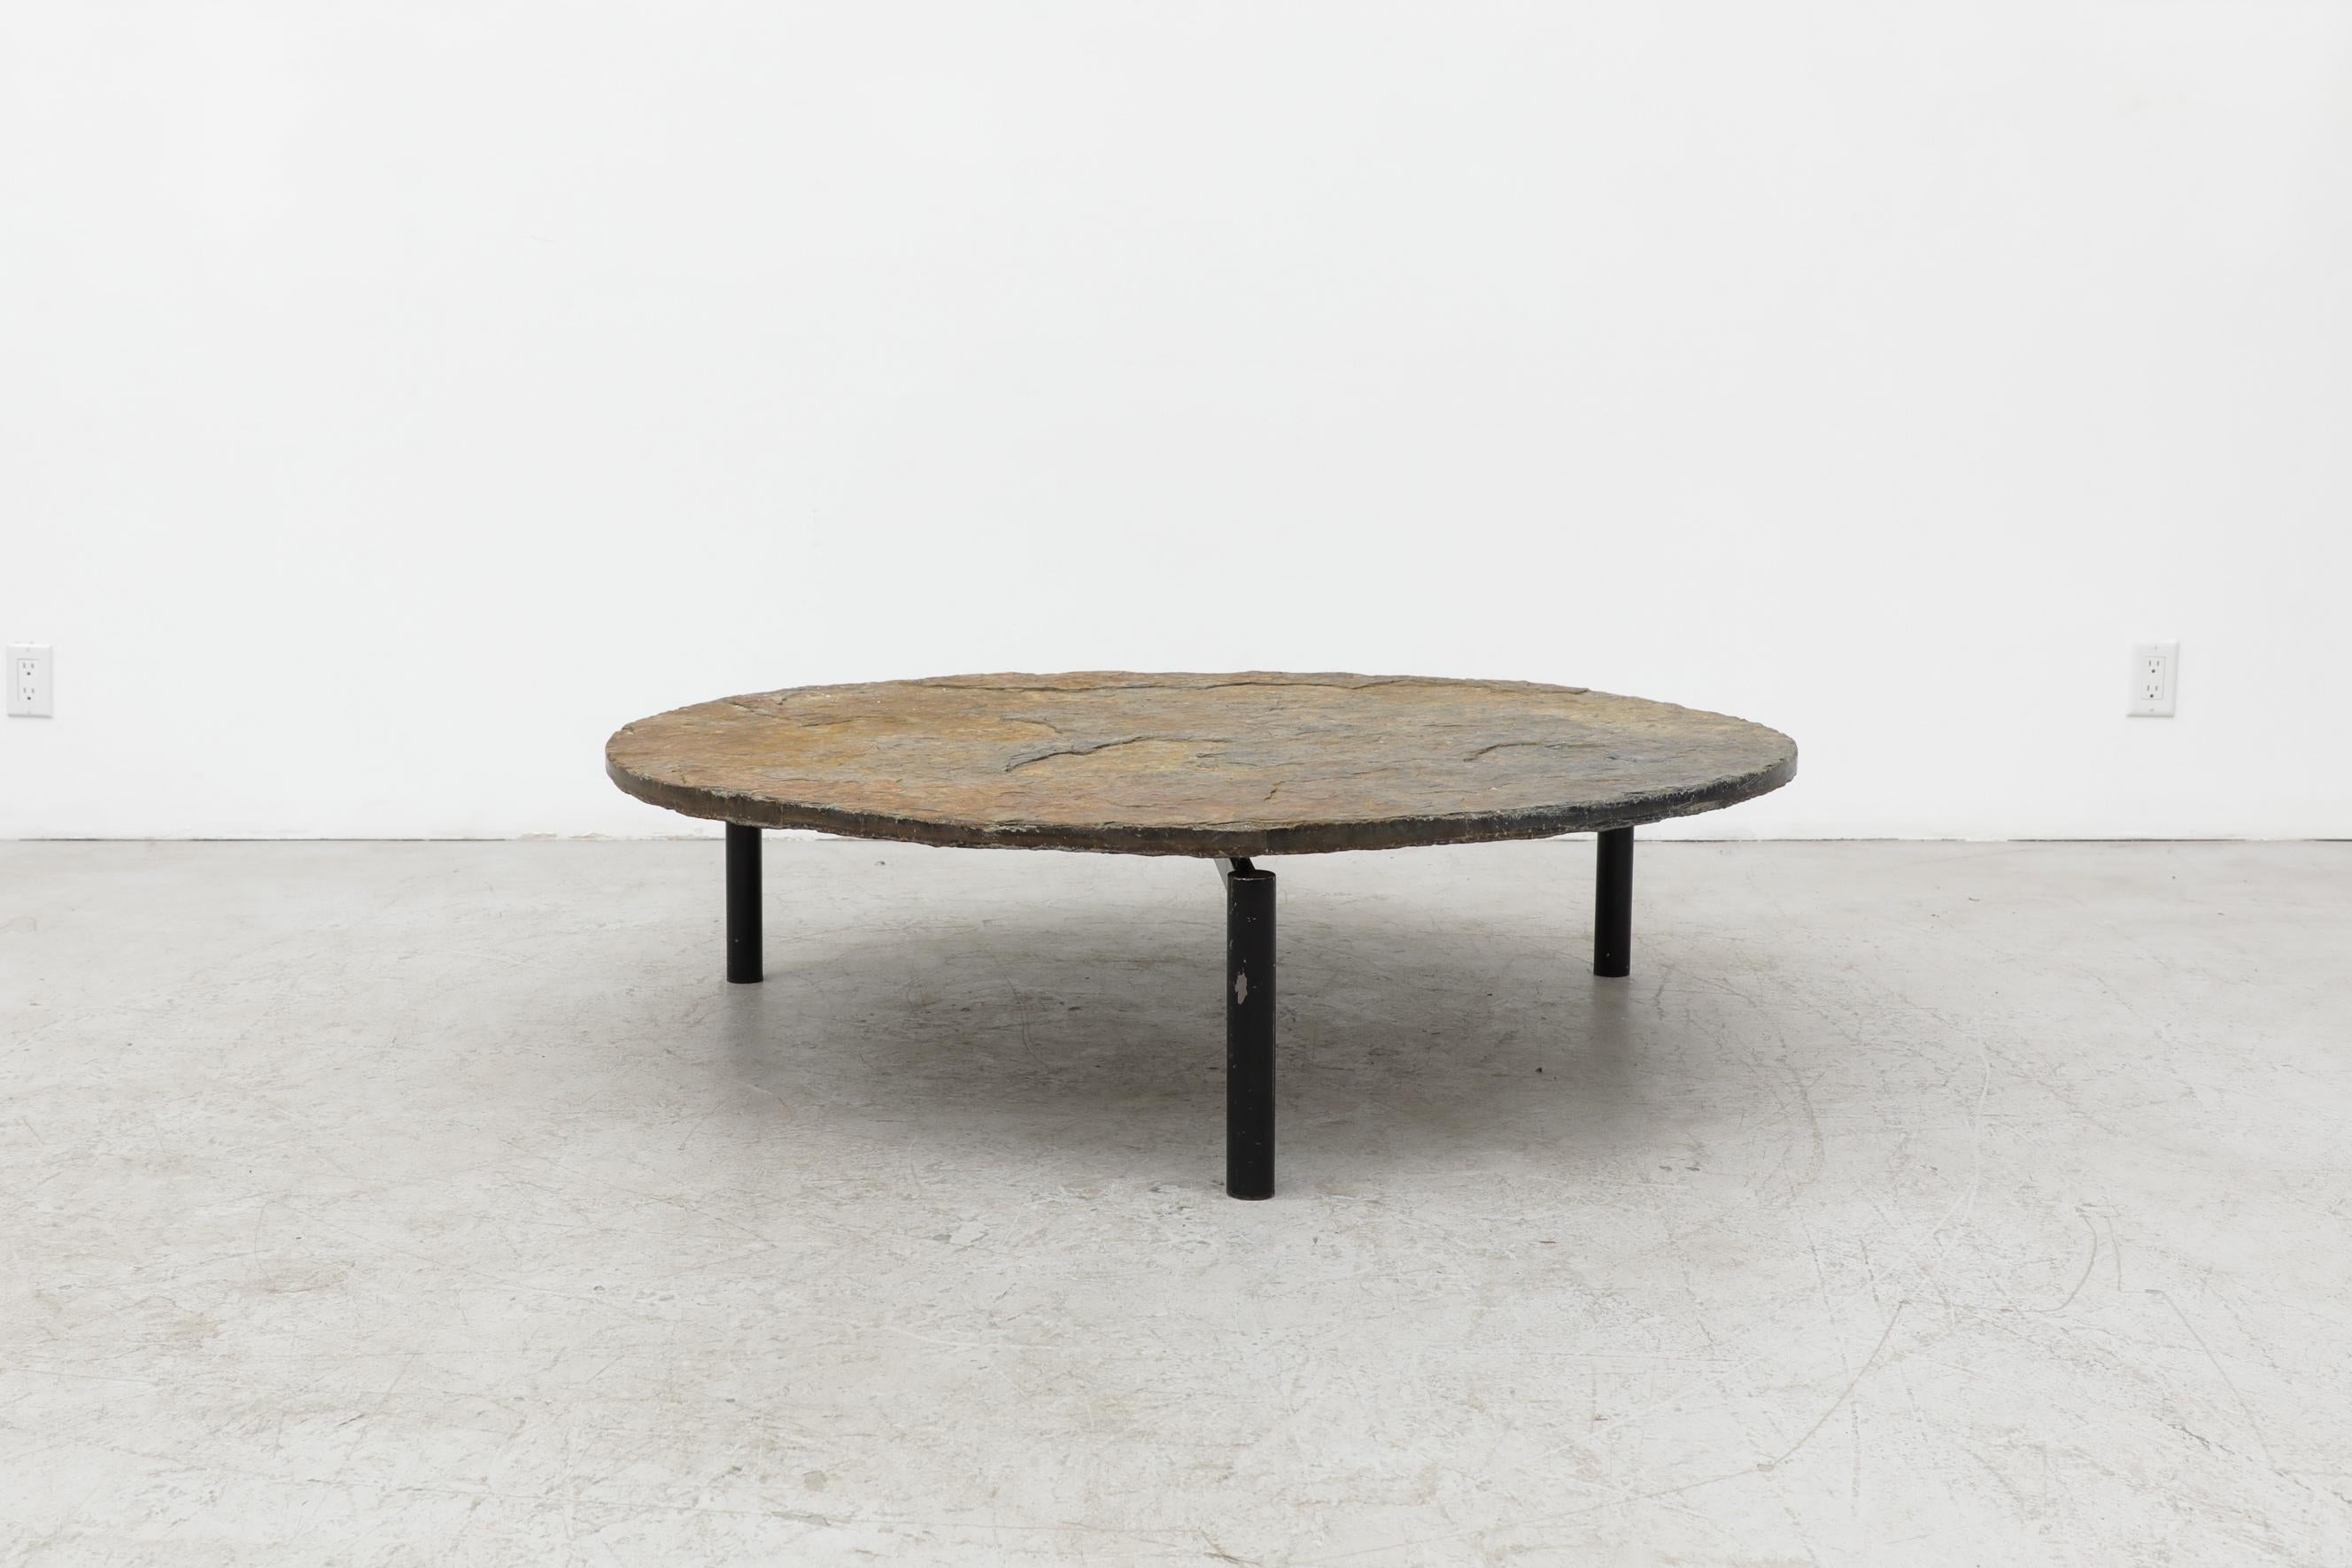 Extra large Martin Visser style stone topped coffee table with dark brown enameled metal tripod base. Both the top and the base show considerable wear including scratching and chipping to the stone as well as visible wear and enamel loss on the